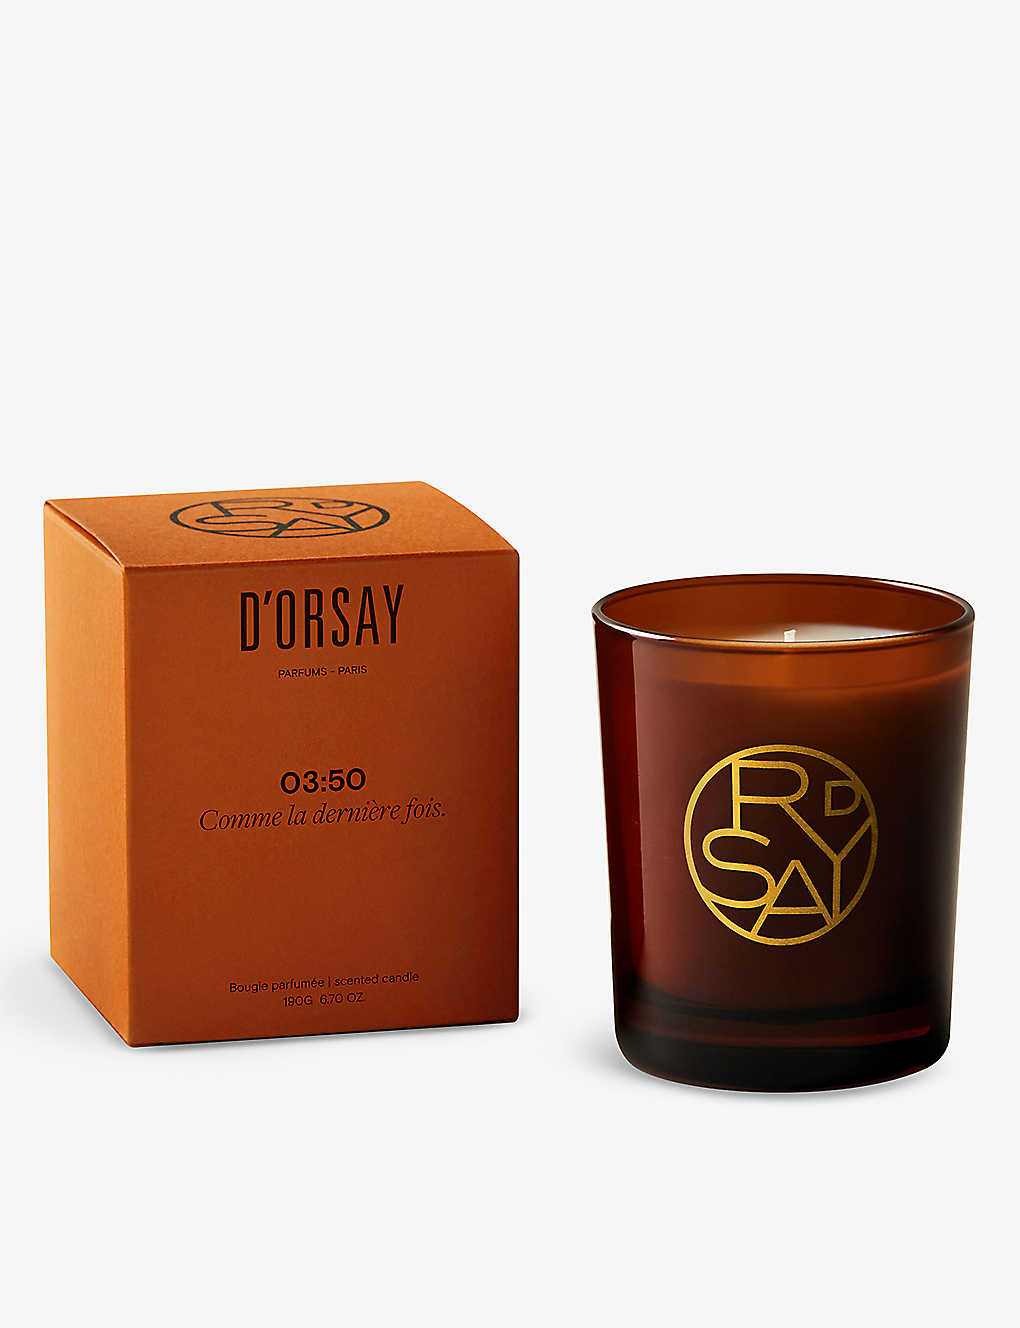 D'orsay 03:50 Scented Candle 190g